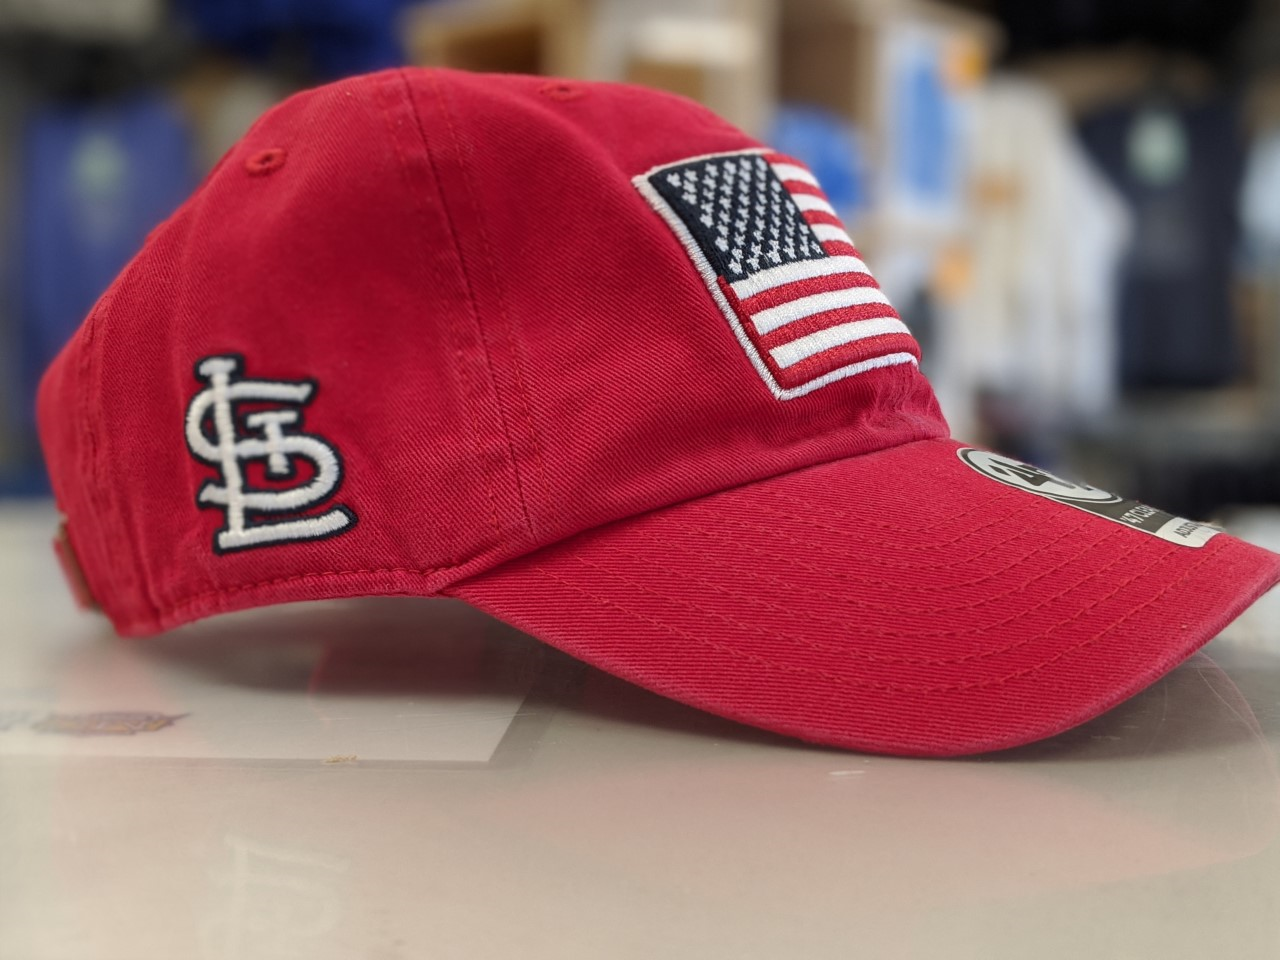 St. Louis Cardinals '47 Clean Up Adjustable Hat - Red